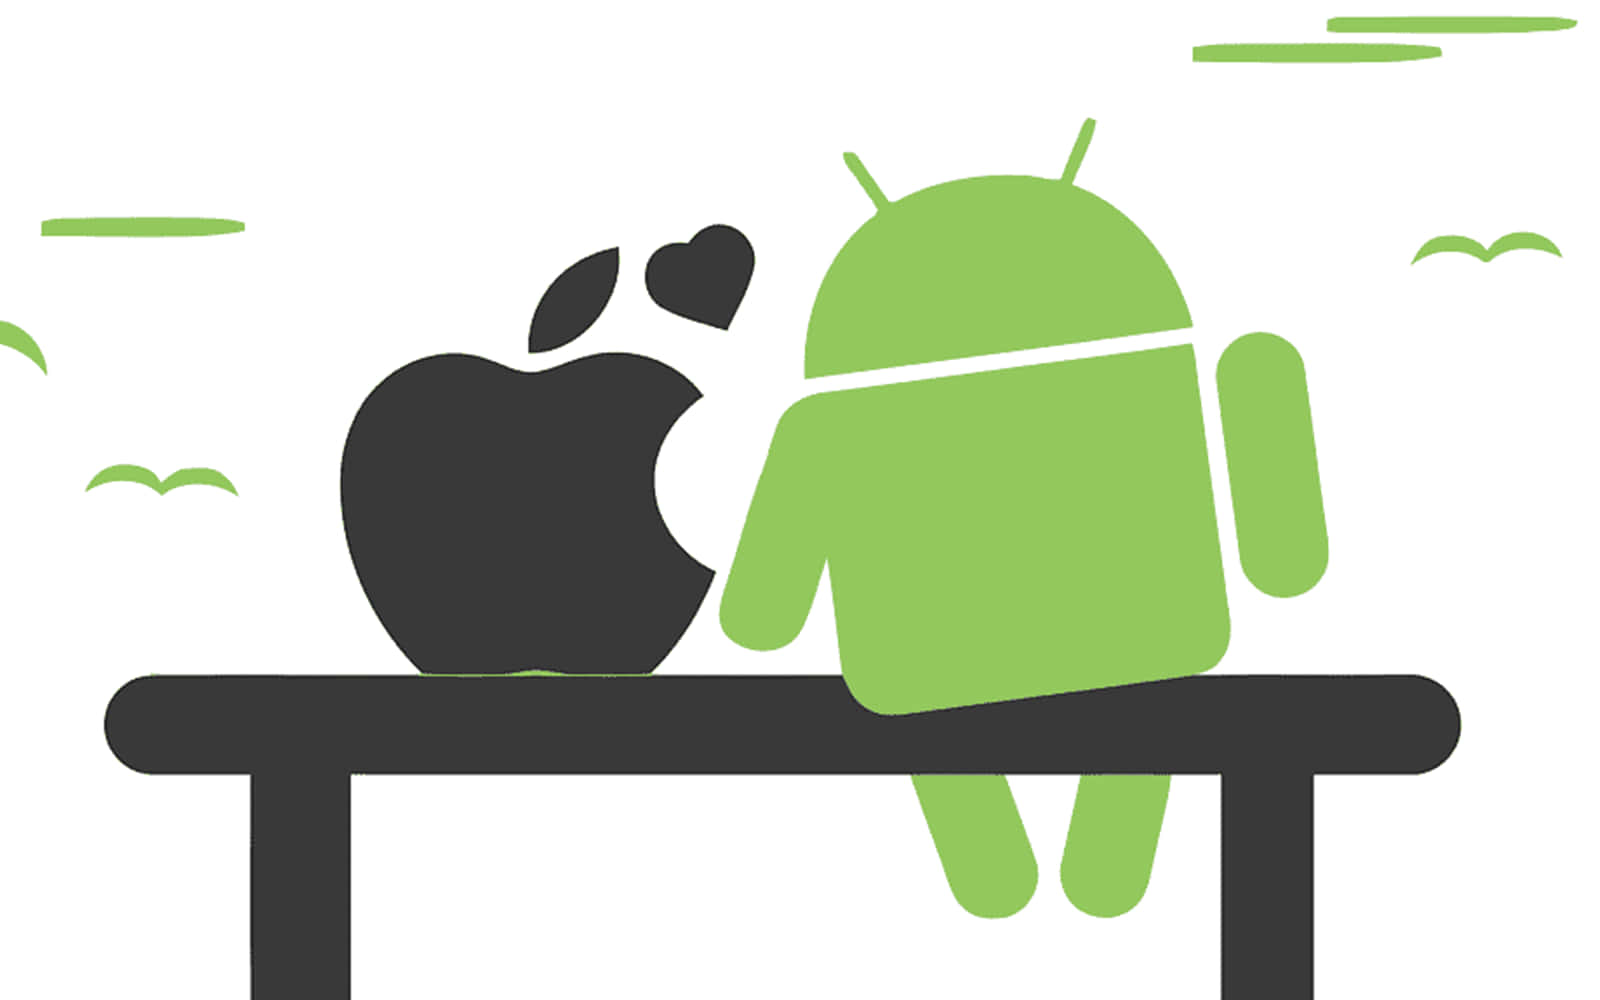 Apple&Android: The Two Tech Giants Wallpaper